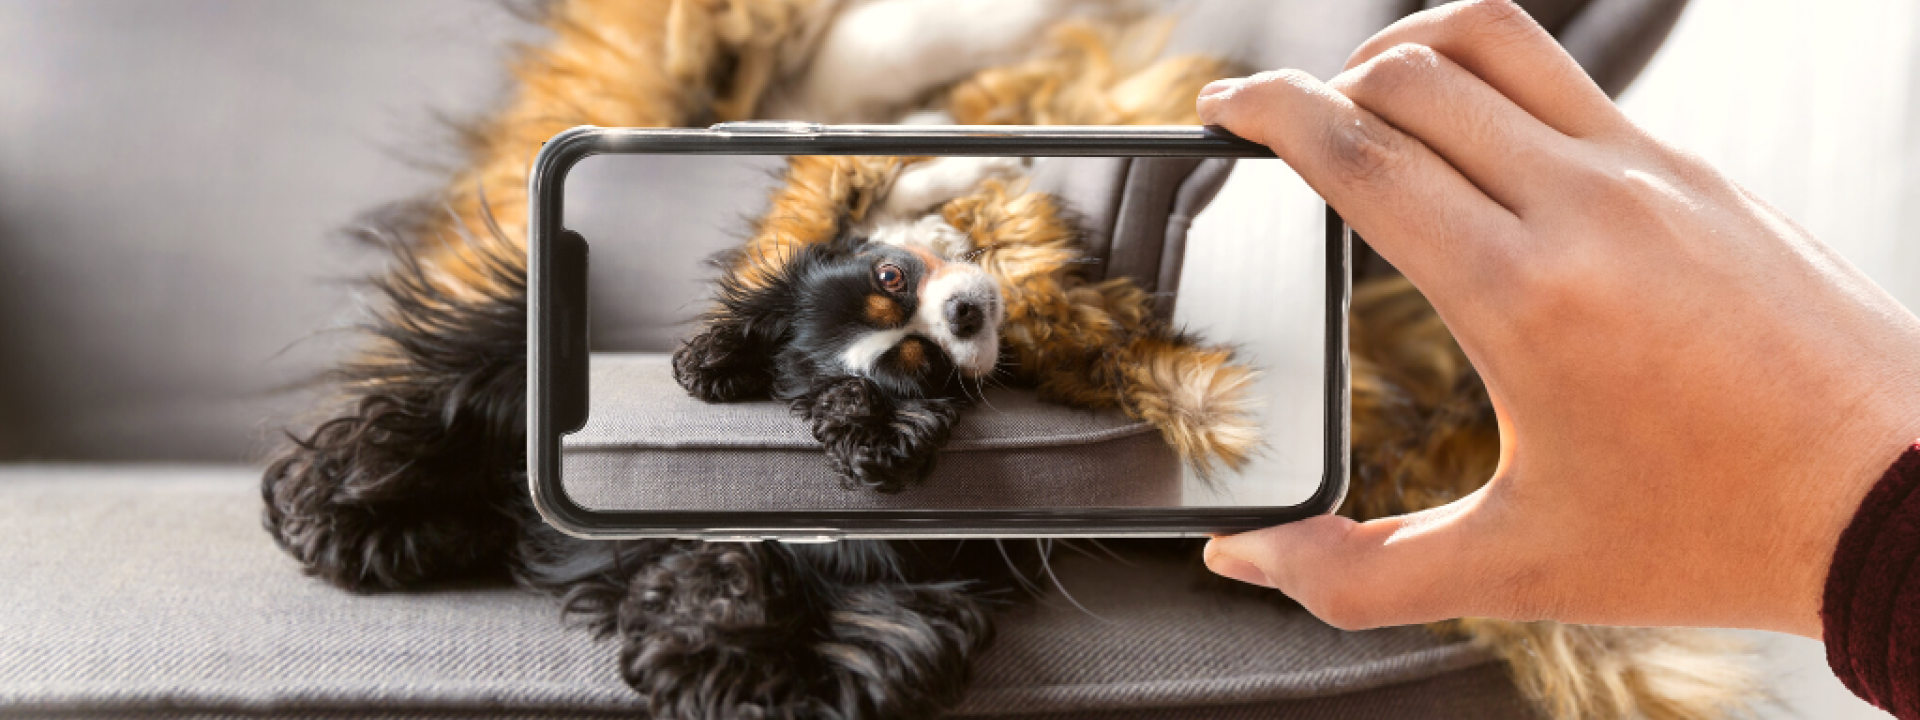 A human is taking a picture or photo of his pet Cavalier King Charles Spaniel dog.